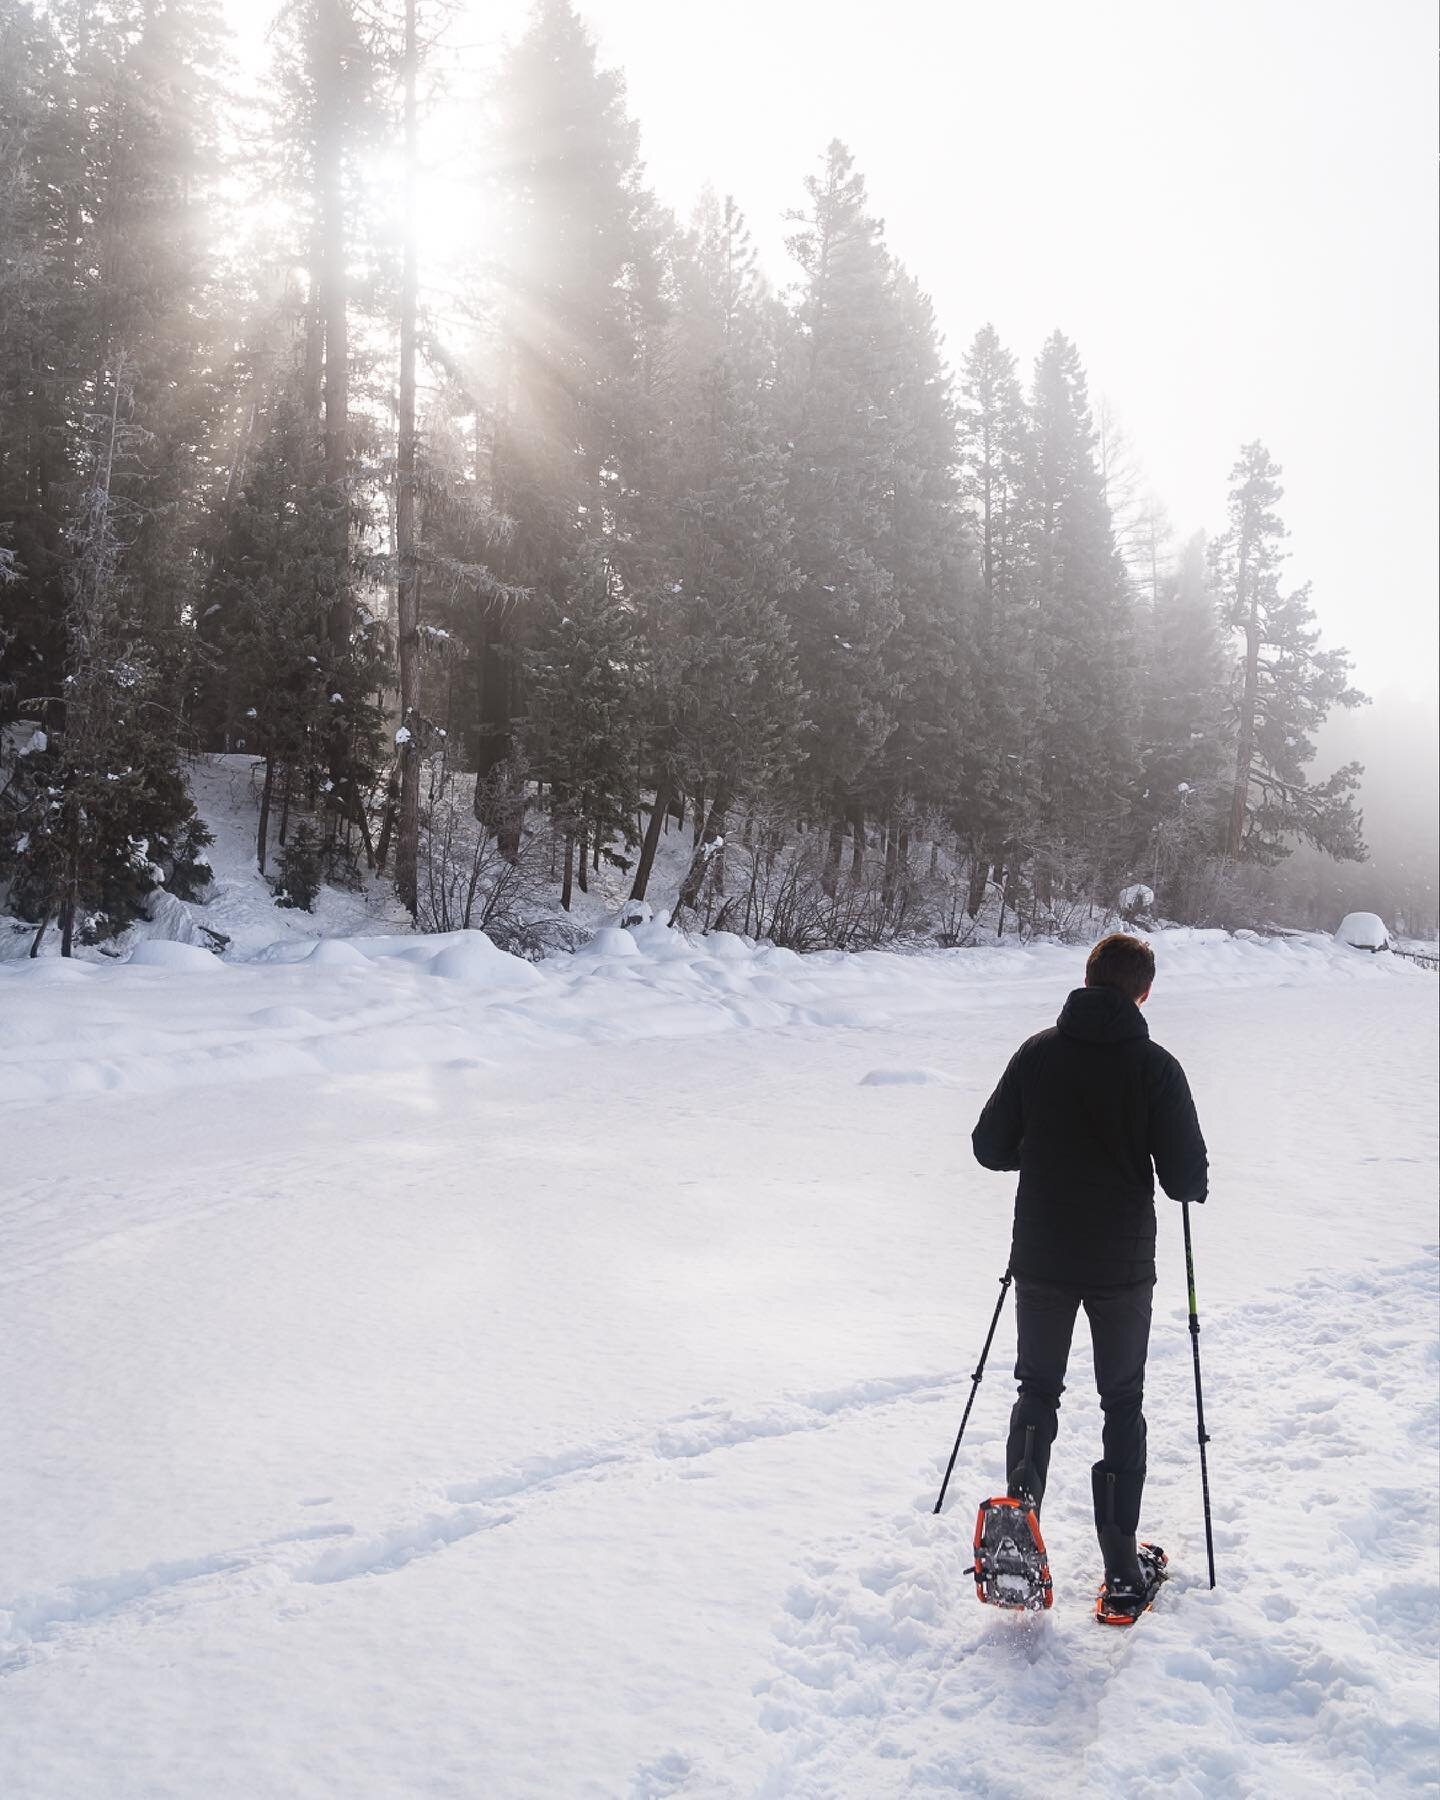 ❄️Enjoying your winter?❄️

It&rsquo;s not hard to get the most out of winter at Scandia Inn. Come on by the office when you book a room and we&rsquo;ll get you a few pairs of snowshoes for you and your friends to hit the trails and see all the beauty